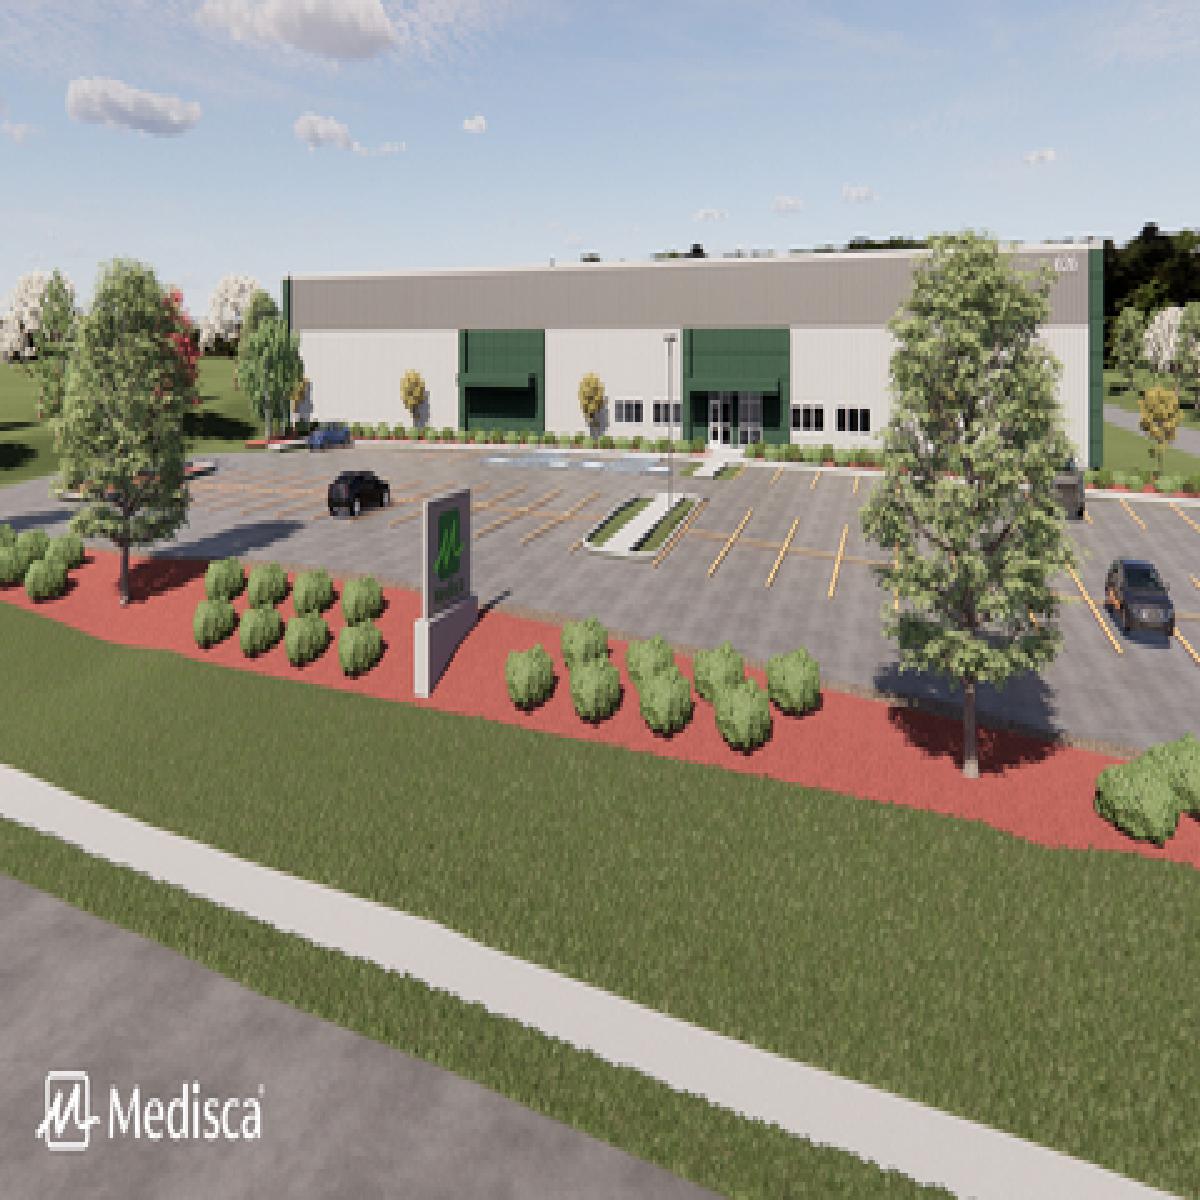 Medisca to Open New Plattsburgh, NY Facility Exceeding Rigorous Quality and Employee Safety Standards